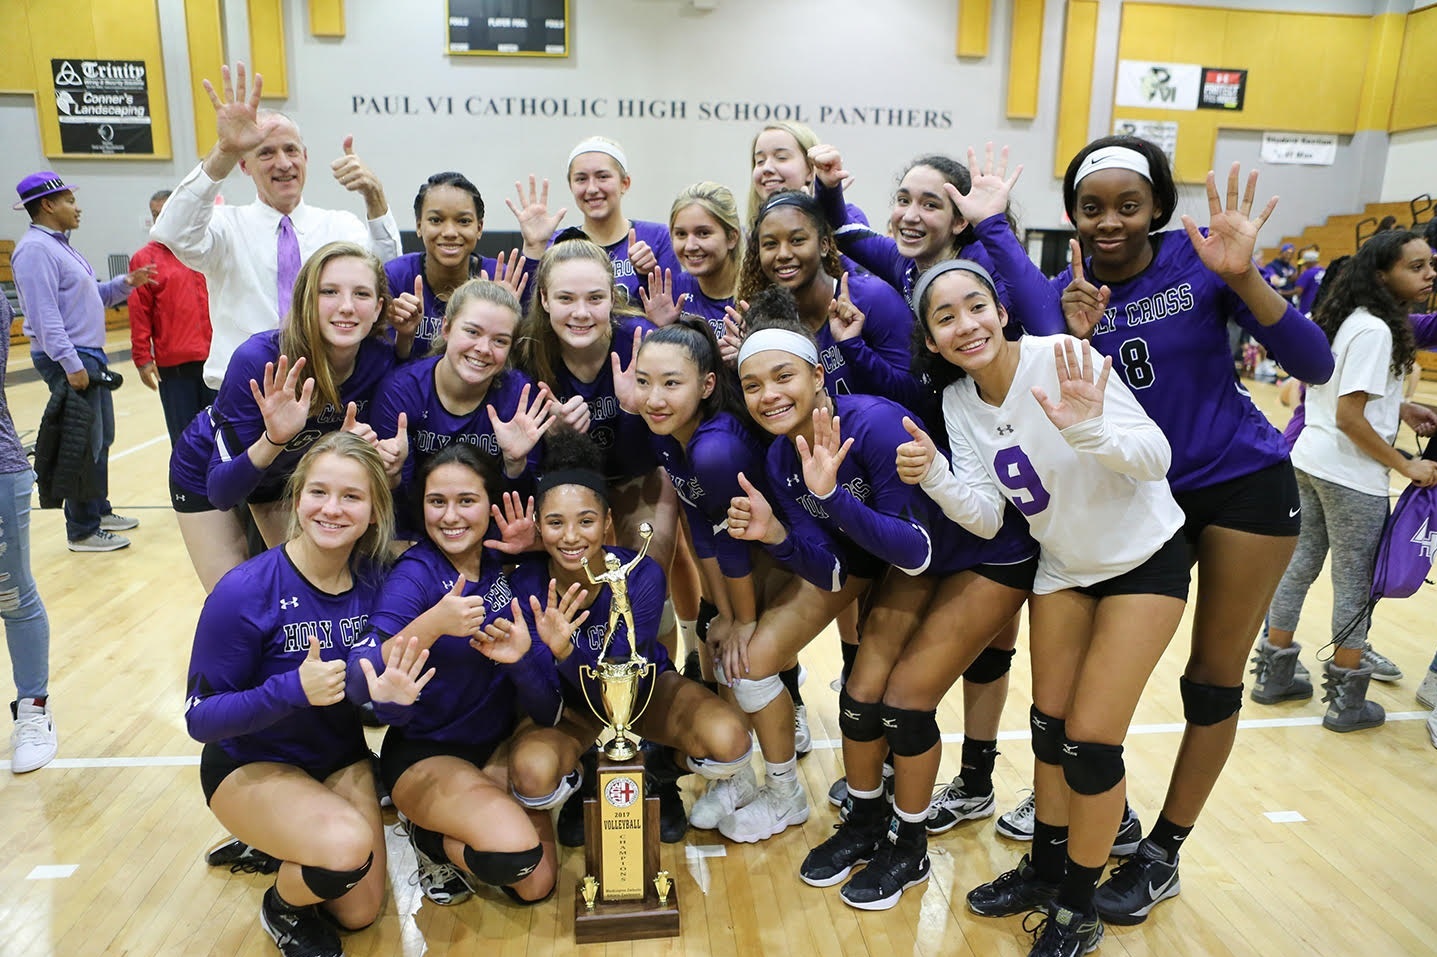 Holy Cross ‘relieved’ to win sixth straight WCAC volleyball title